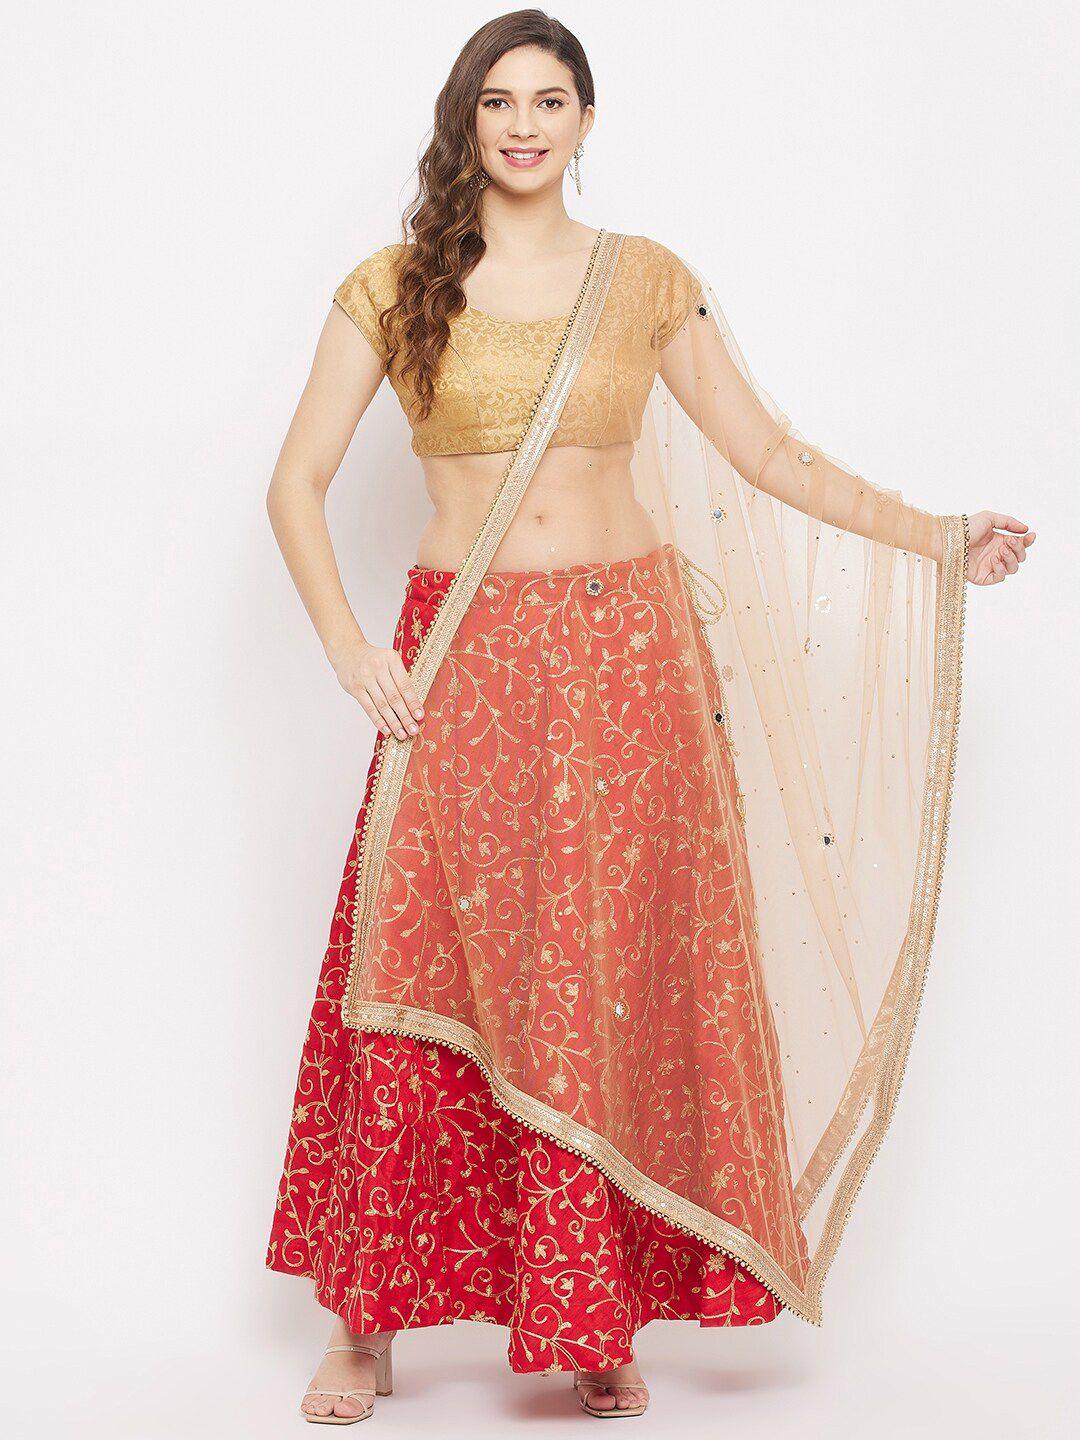 clora-creation-beige-&-gold-toned-ethnic-motifs-embroidered-dupatta-with-beads-and-stones